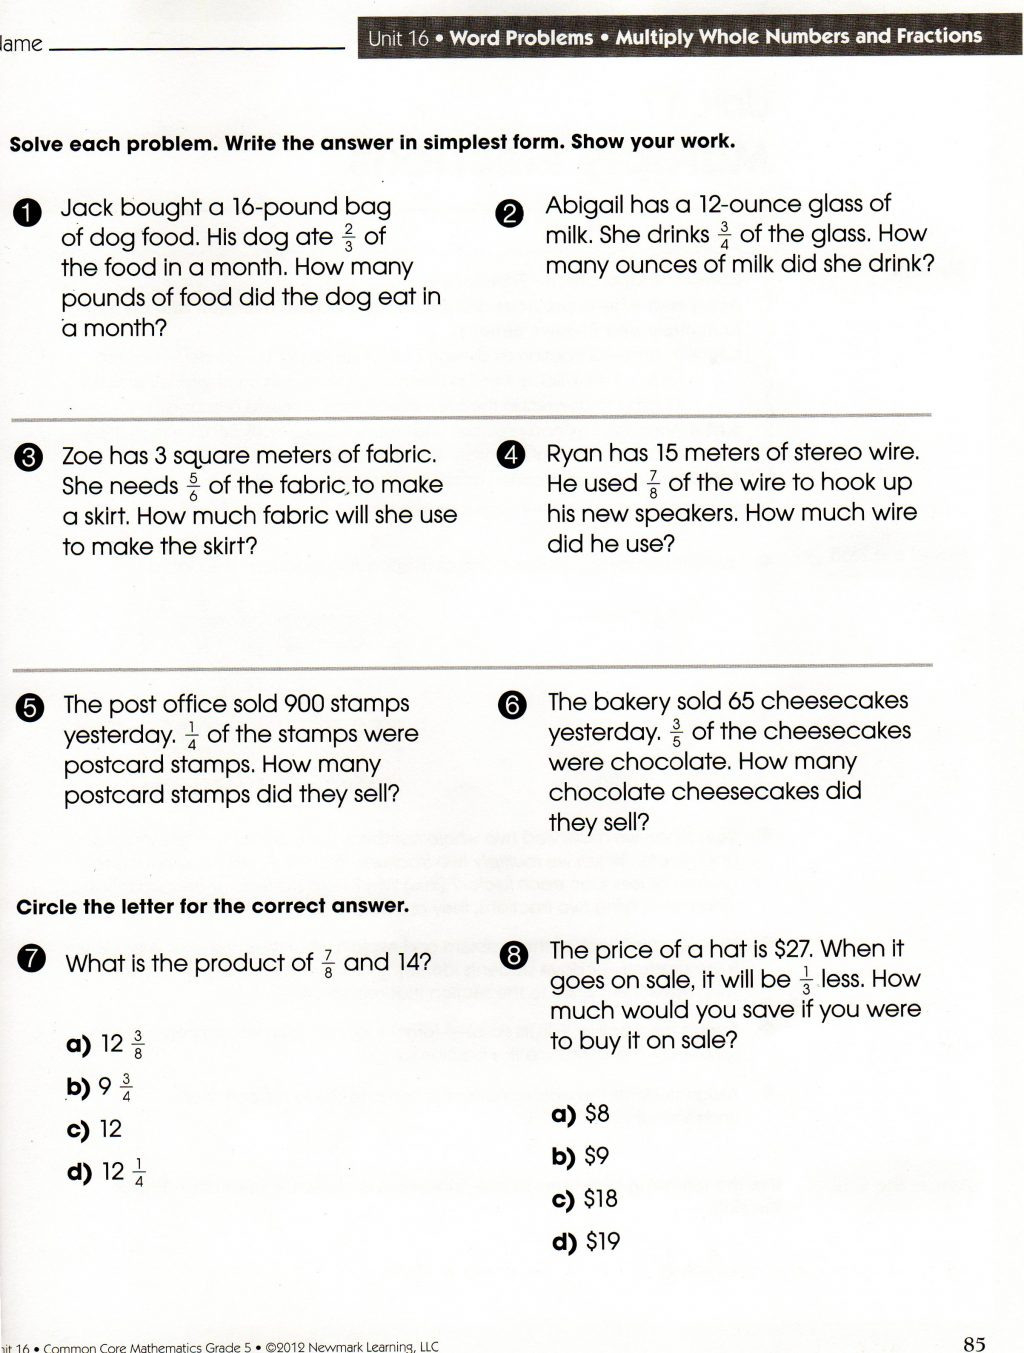 4th Grade Math Division Word Problems Worksheets